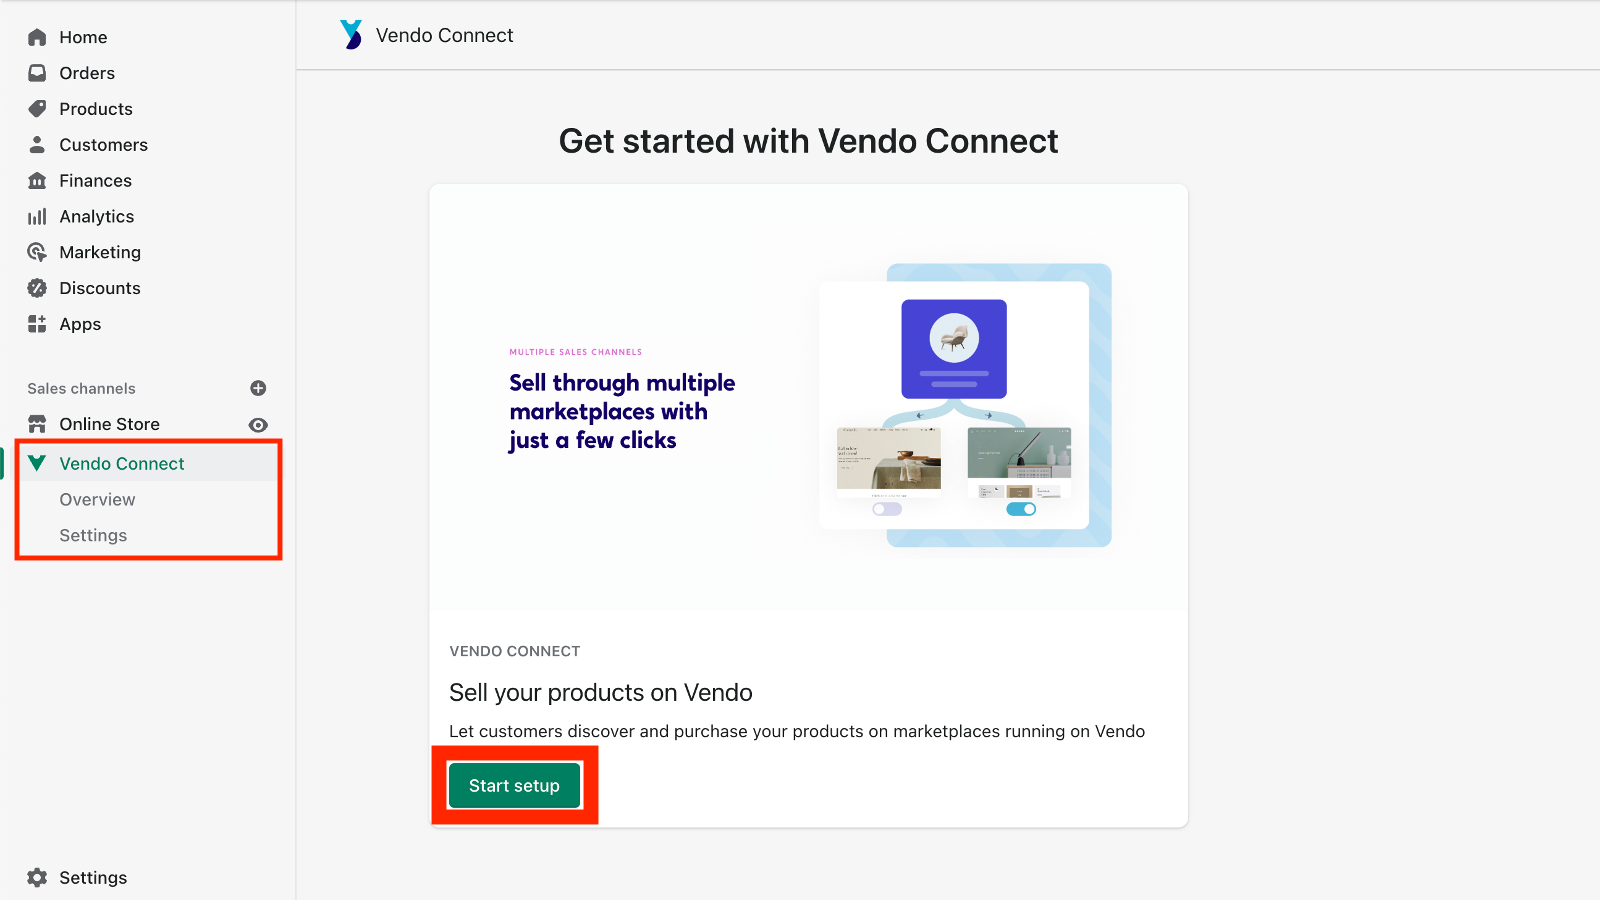 Vendo Connect is yet another sales channel for your store